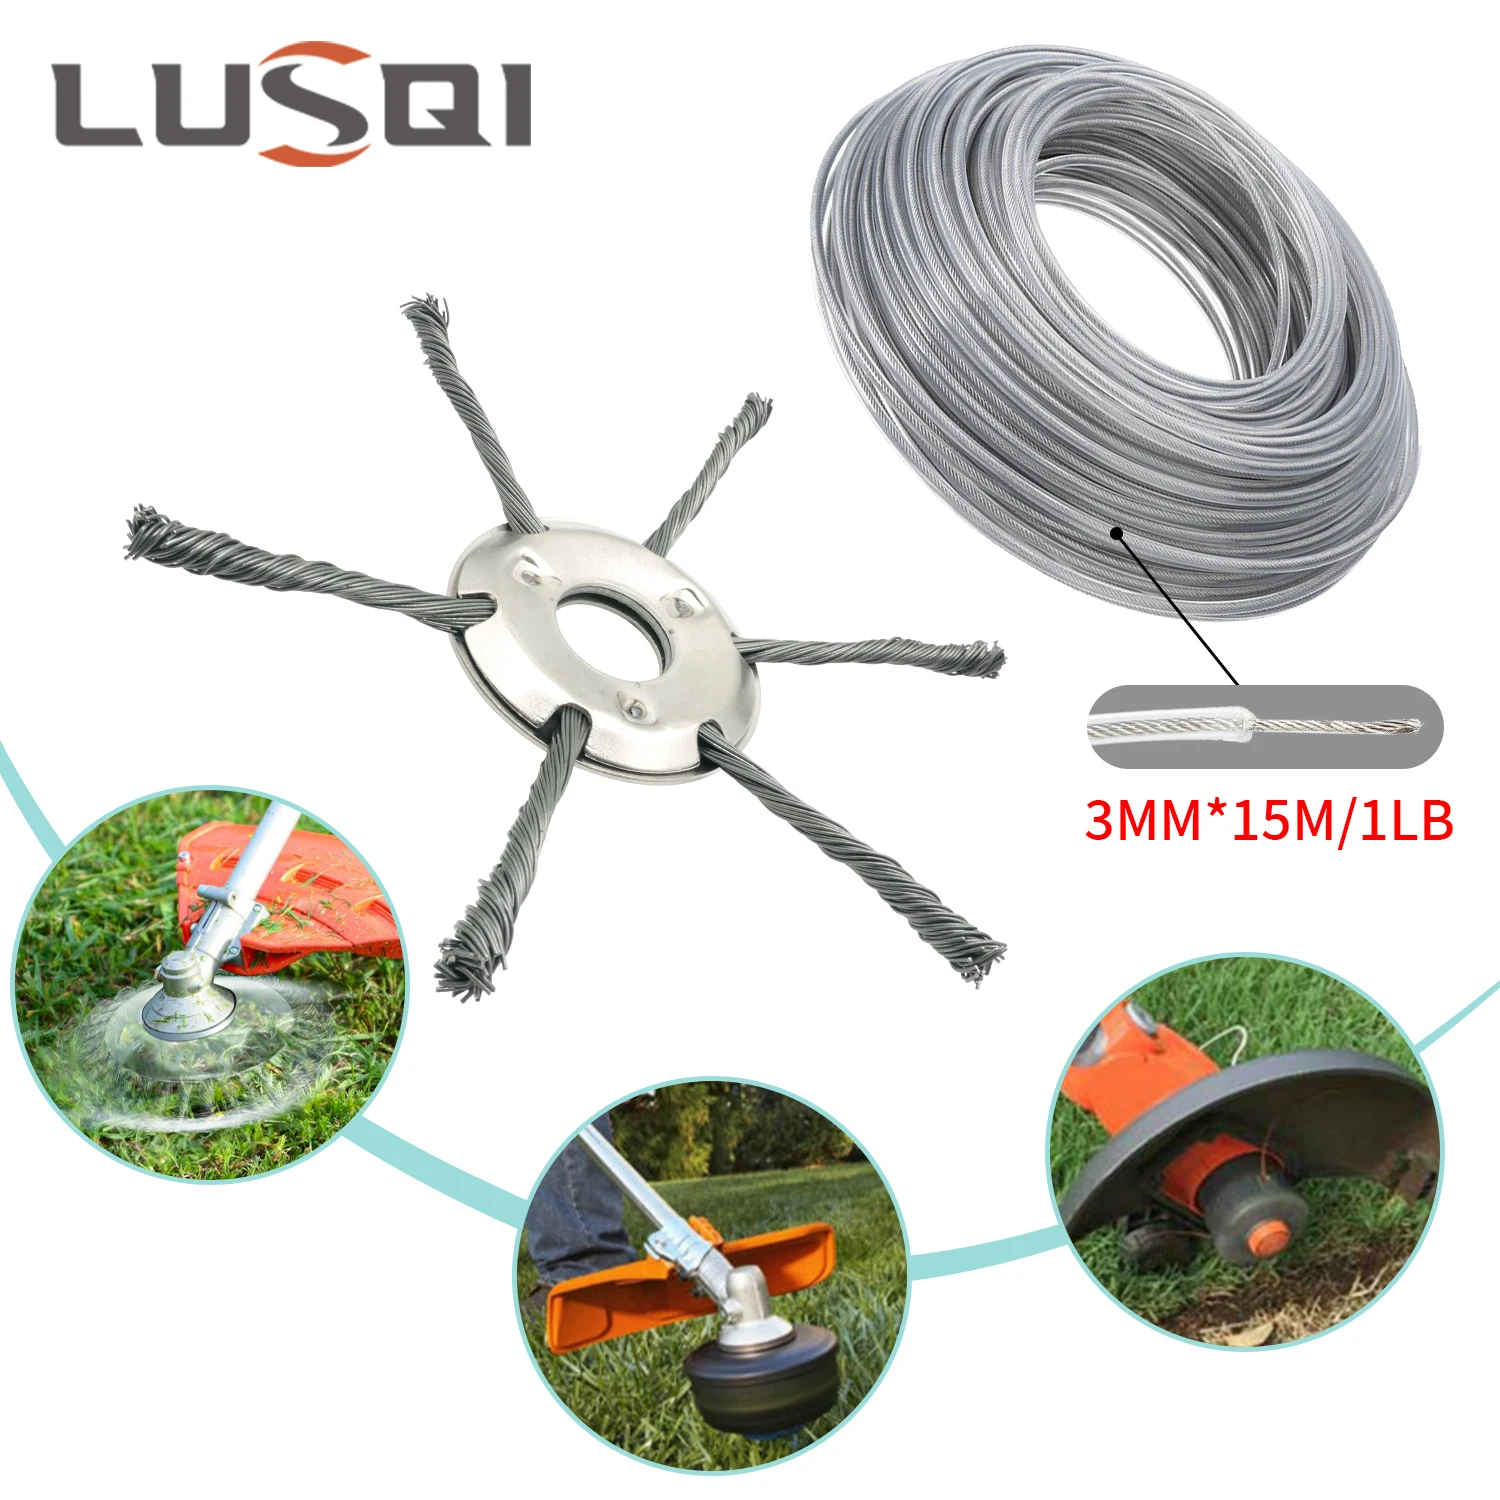 LUSQI Steel Wire Grass Trimmer Head+3mm*15m/1LB Steel Wire Nylon Grass Trimmer Line Gasoline Brush Cutter Lawn Mower Replacement